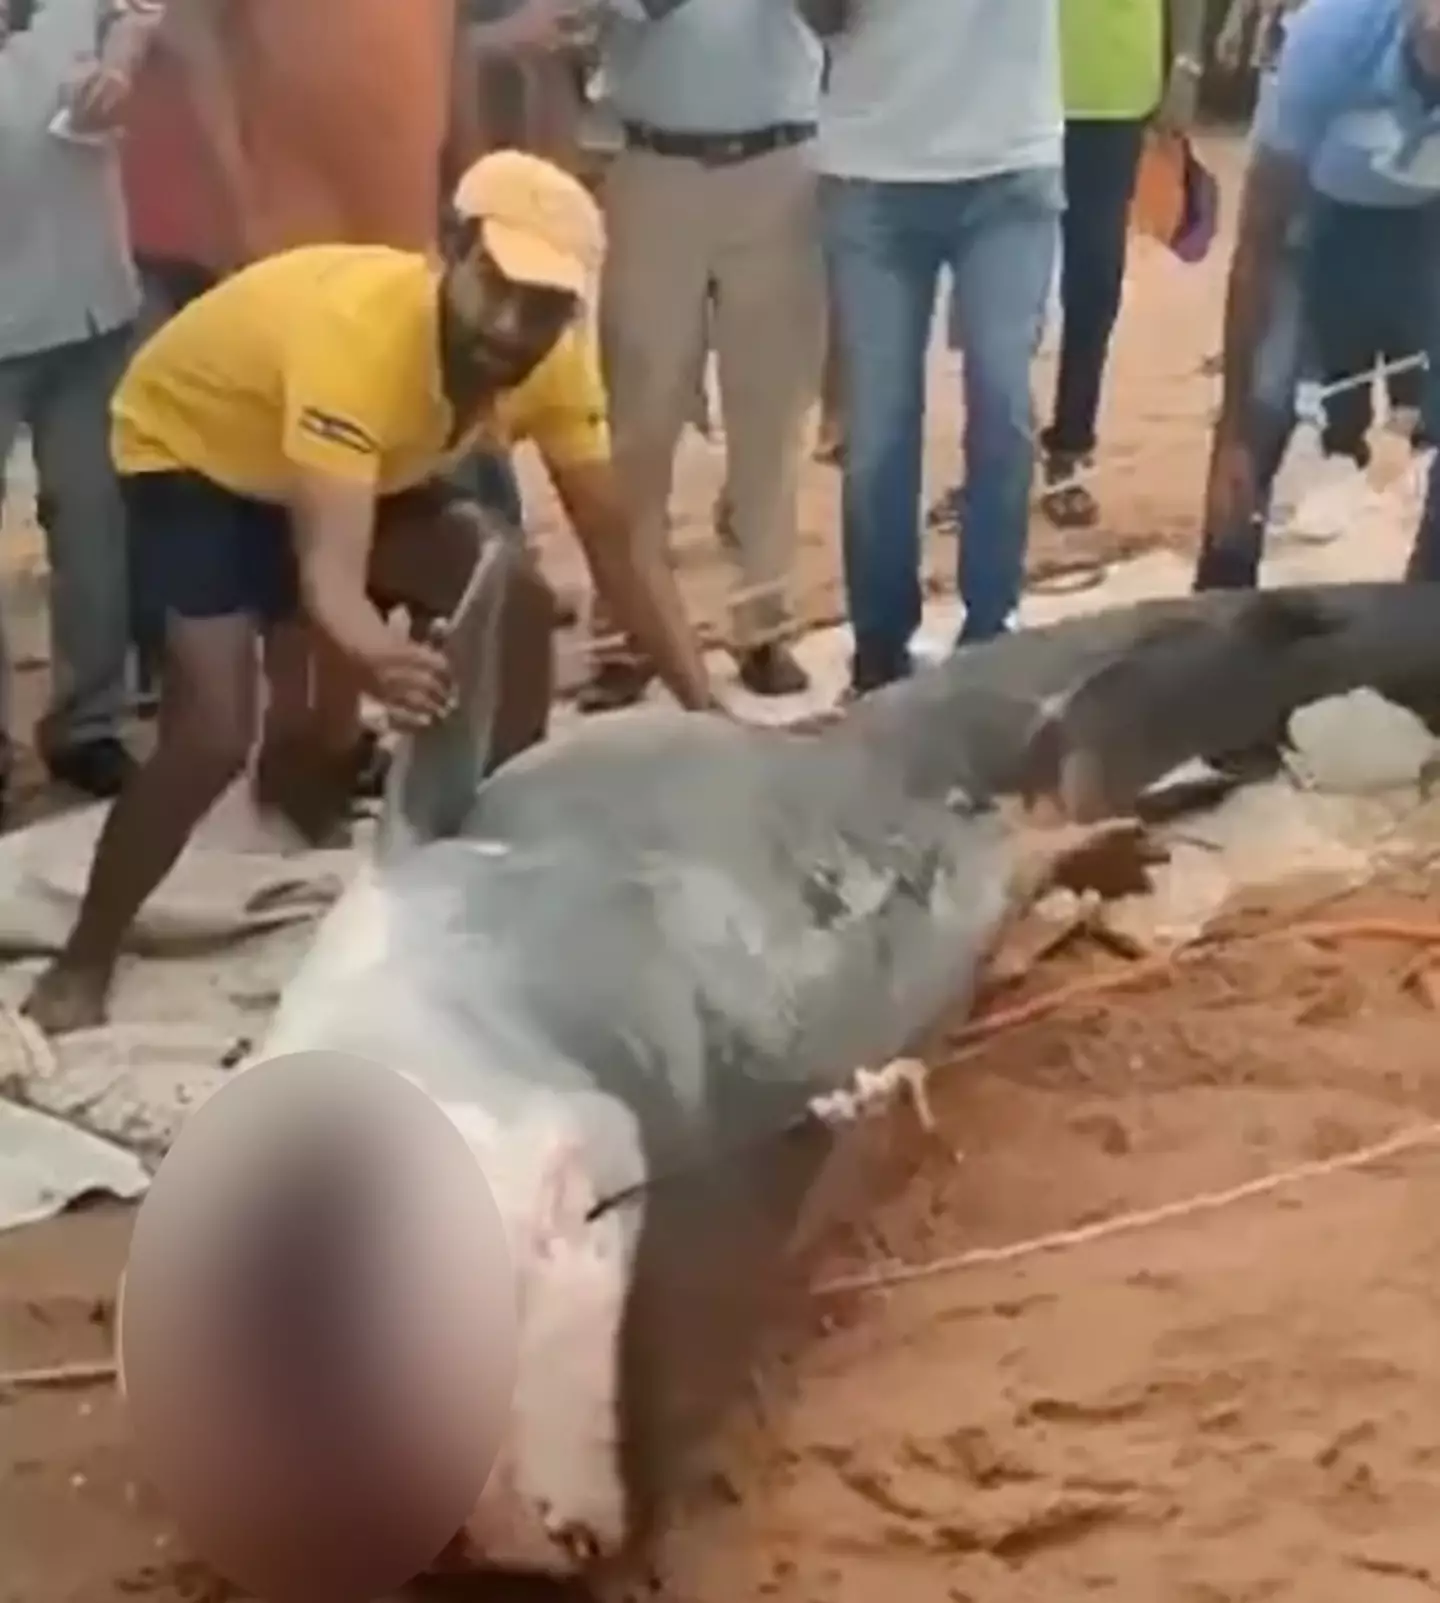 The shark was caught and killed by angry locals.